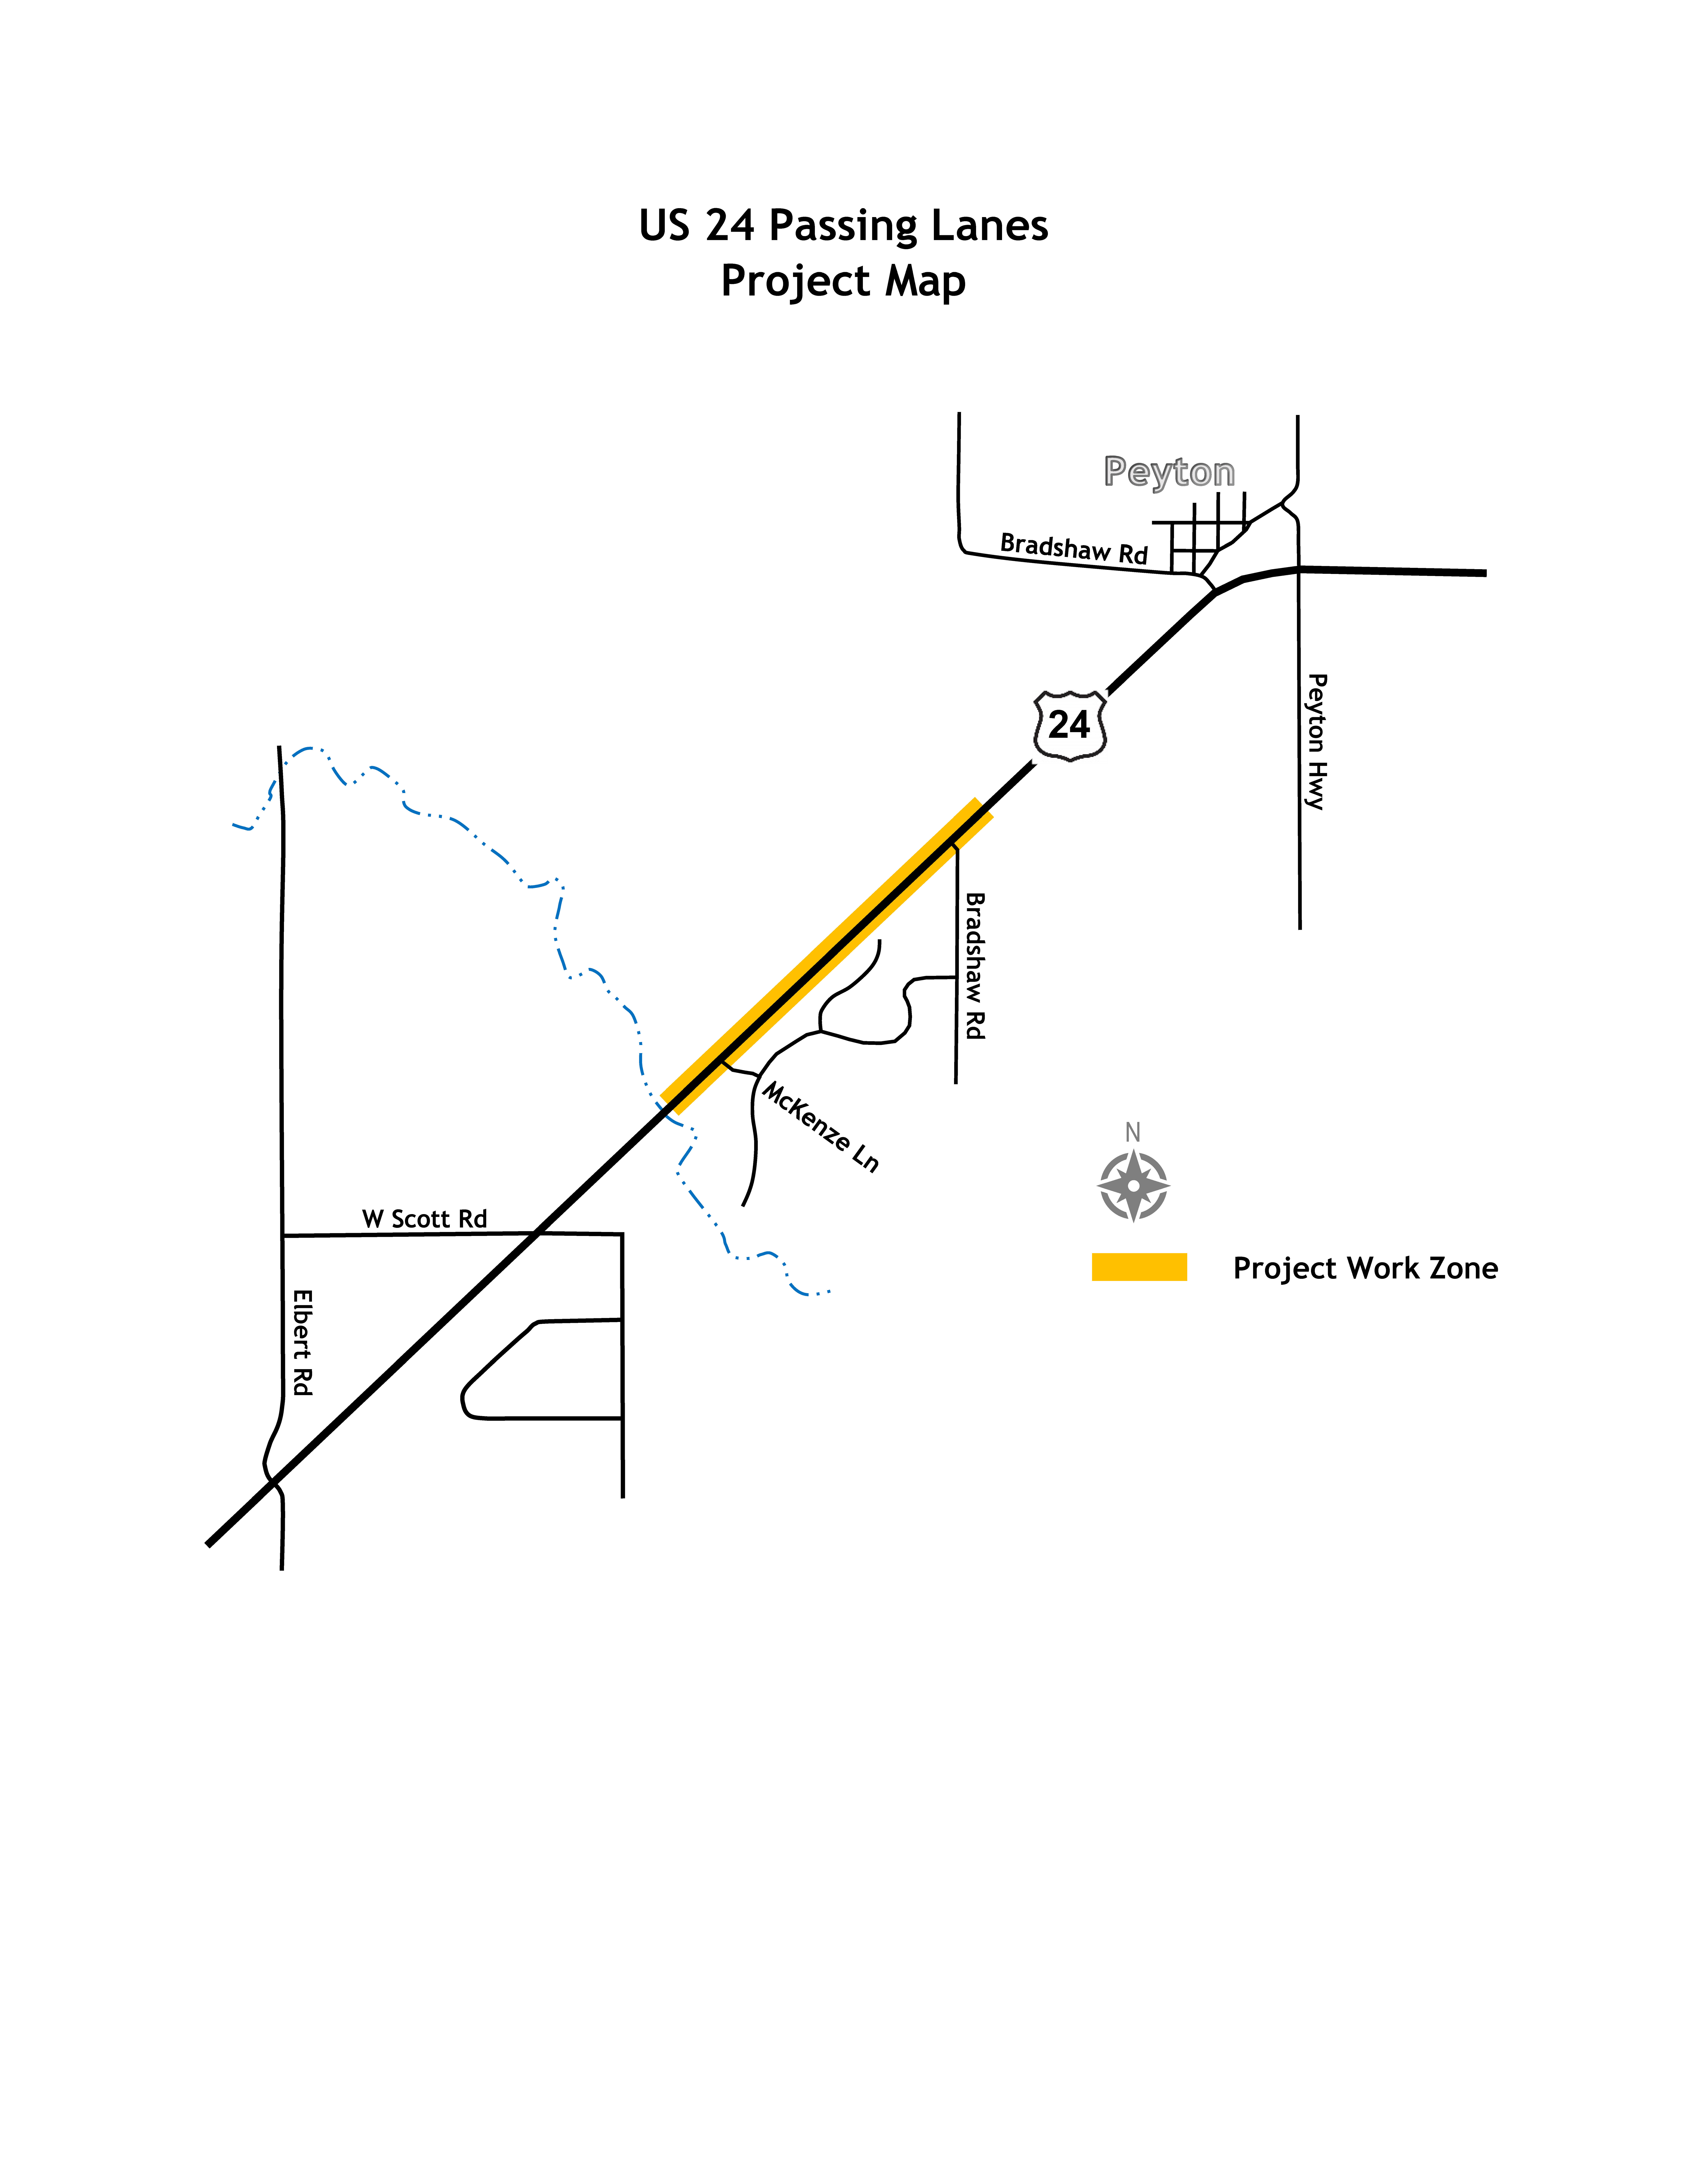 US24 Passing Lanes Project Map.jpg detail image